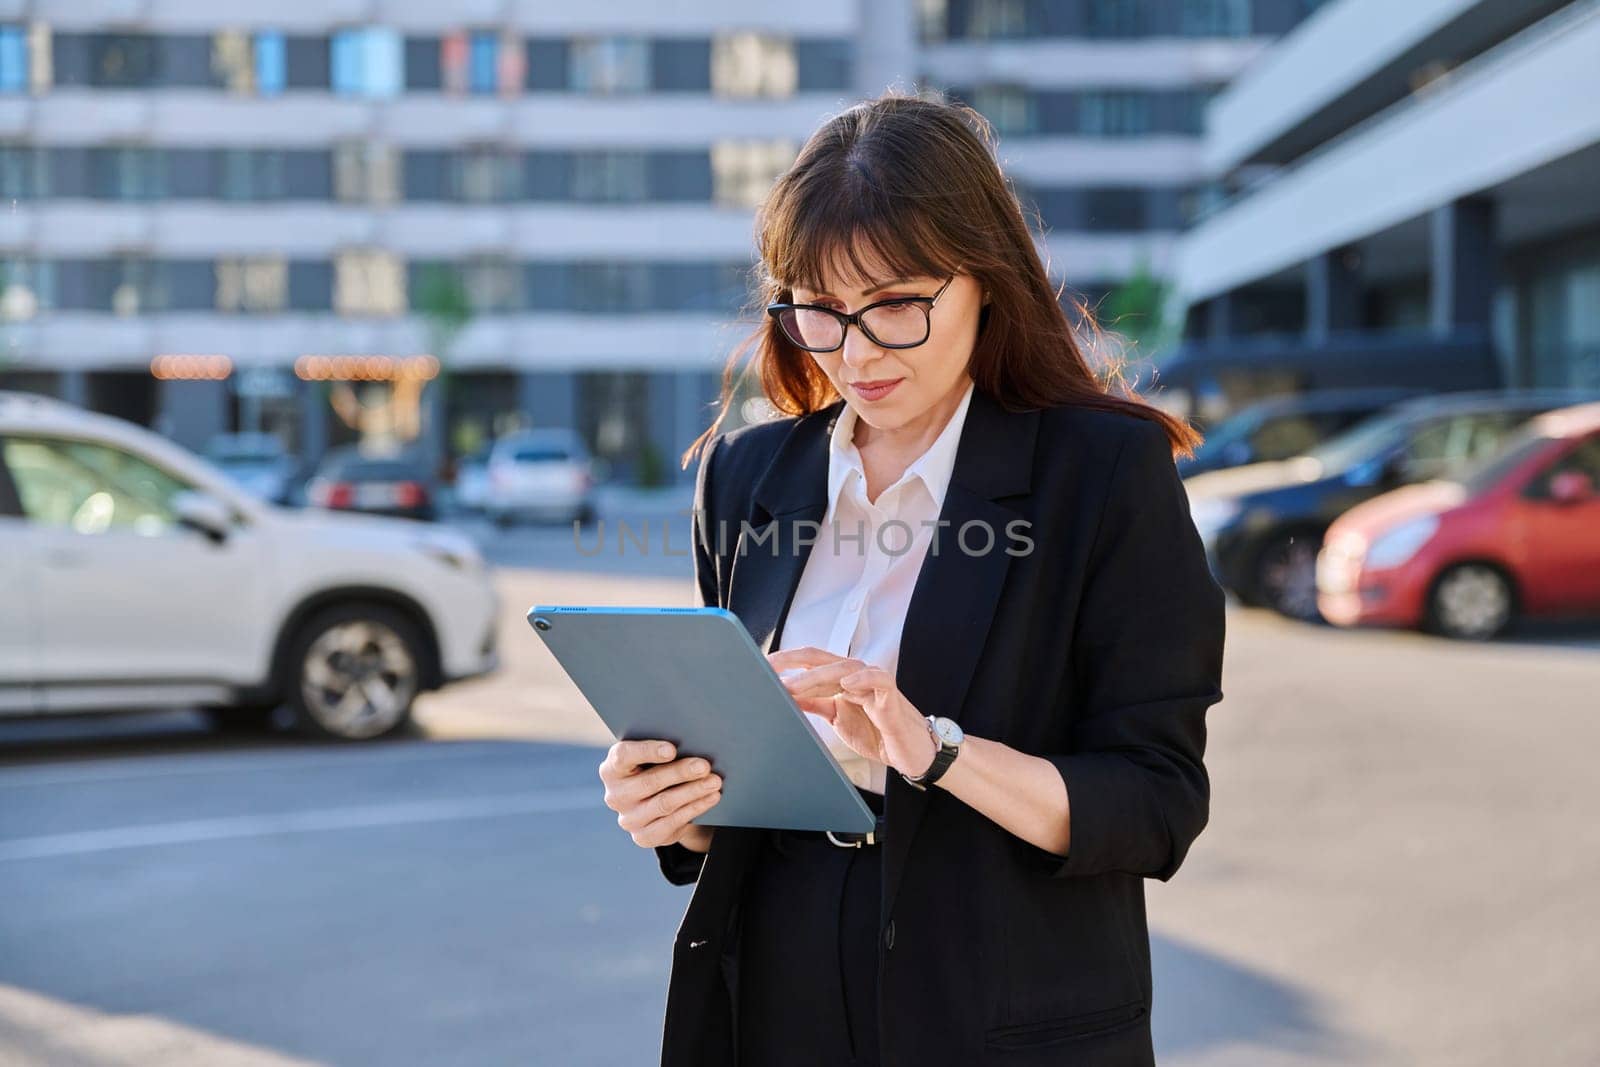 Mature woman manager agent using digital tablet for work, city background by VH-studio